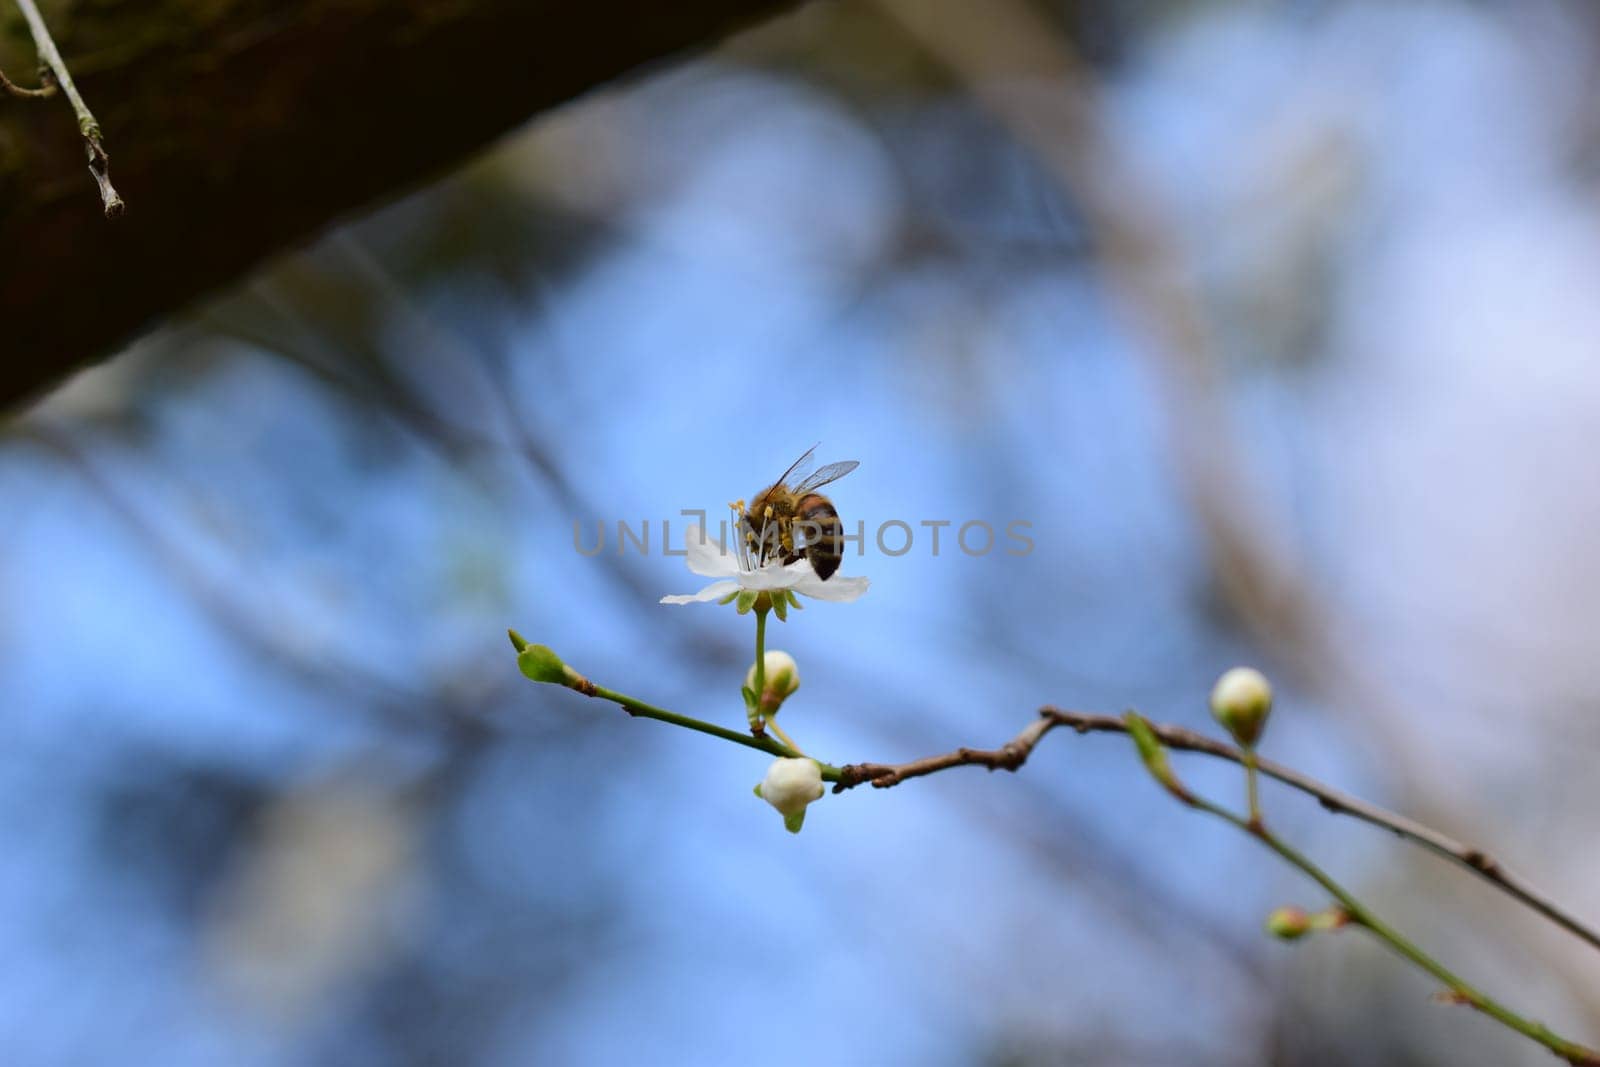 Close up of a honey bee on white blossom against a blurry background